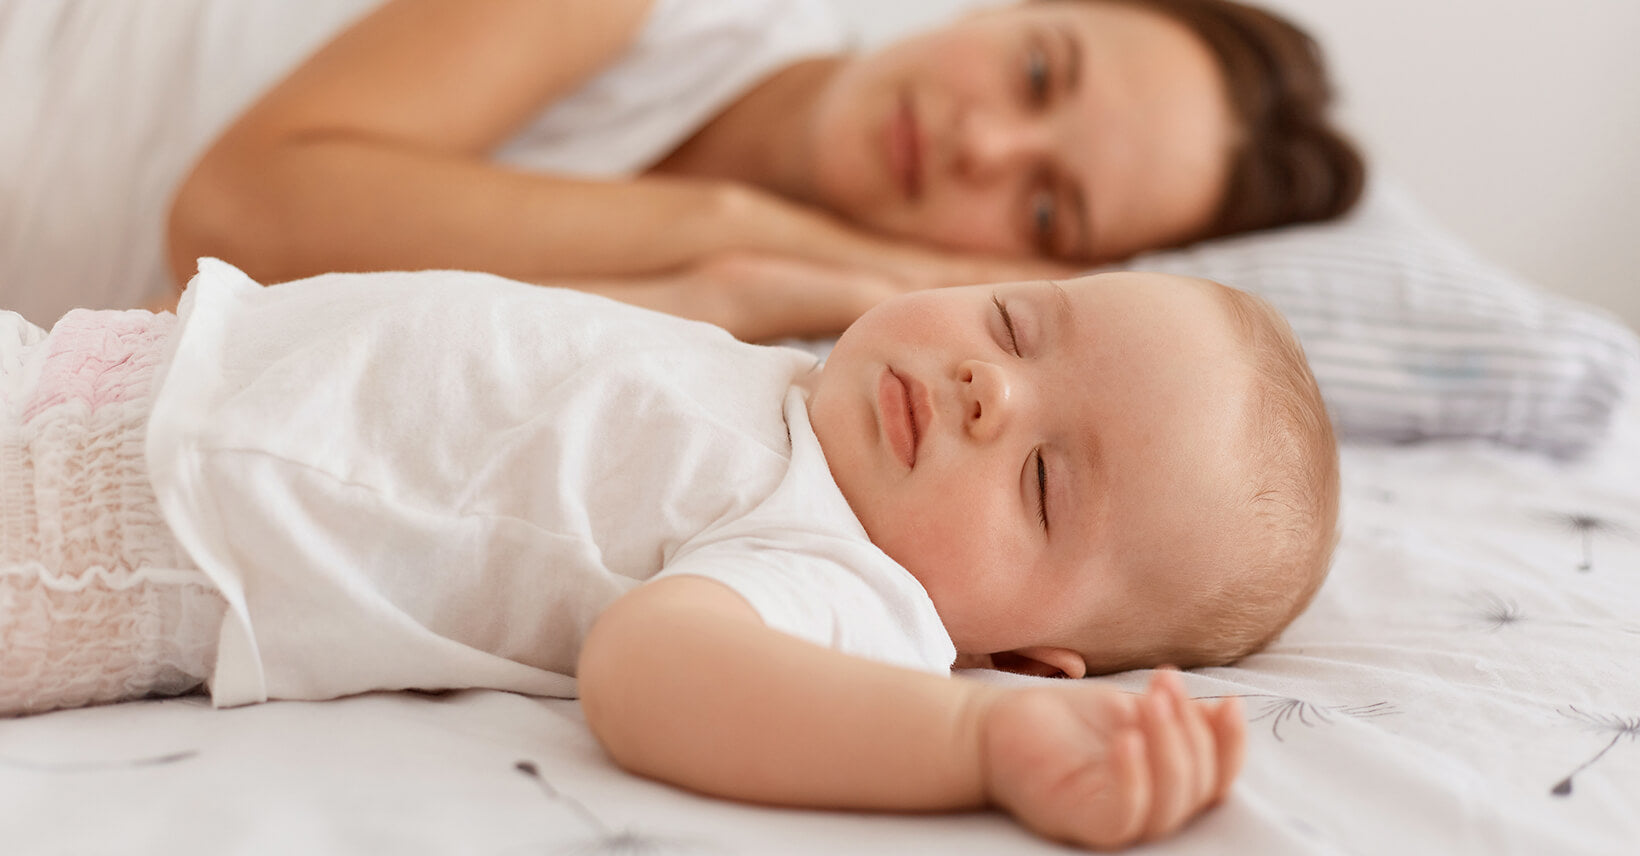 How Can We Deal with Baby Sleep Regression?